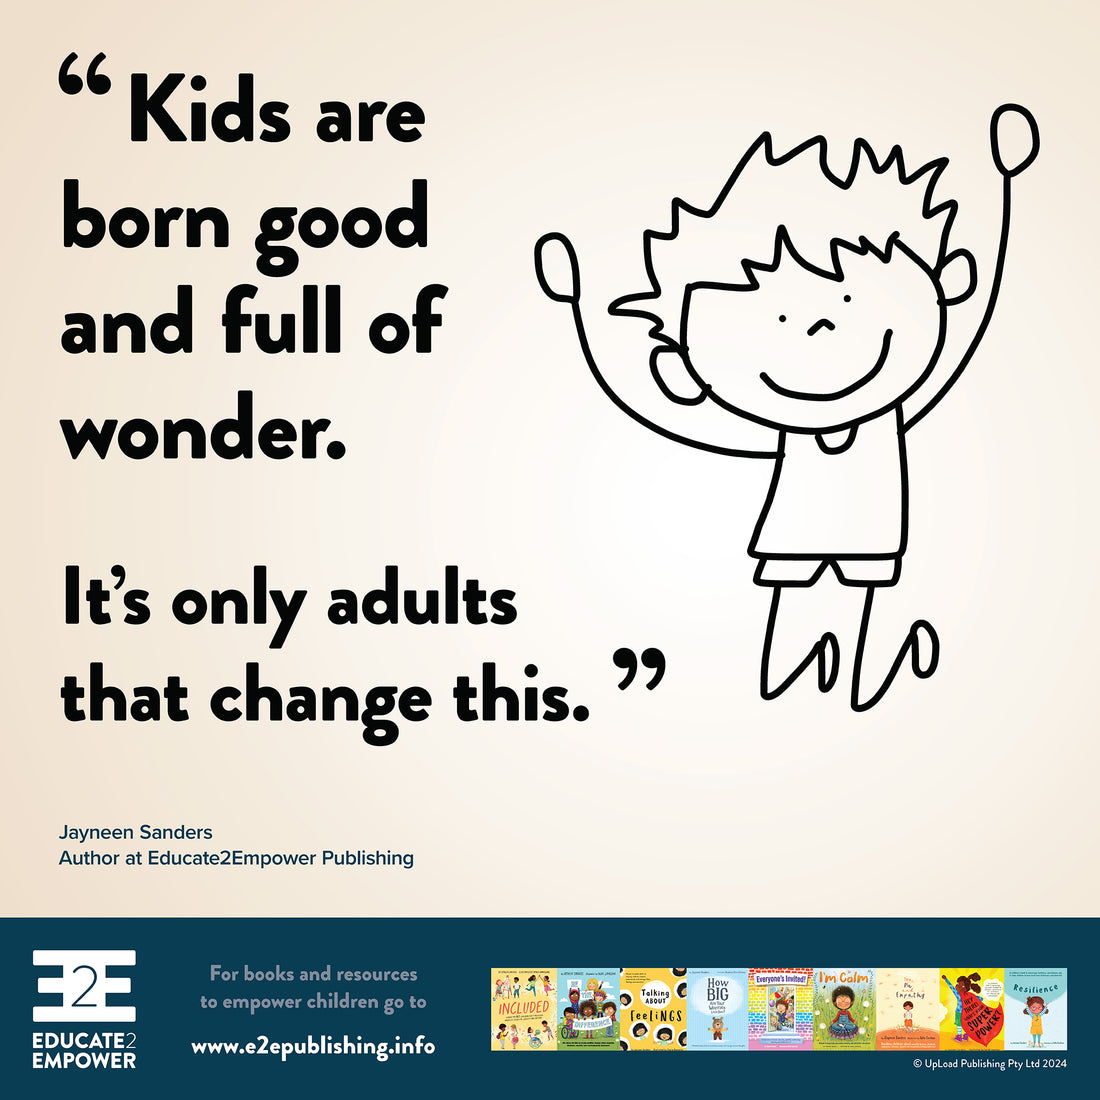 Kids are born good and full of wonder.